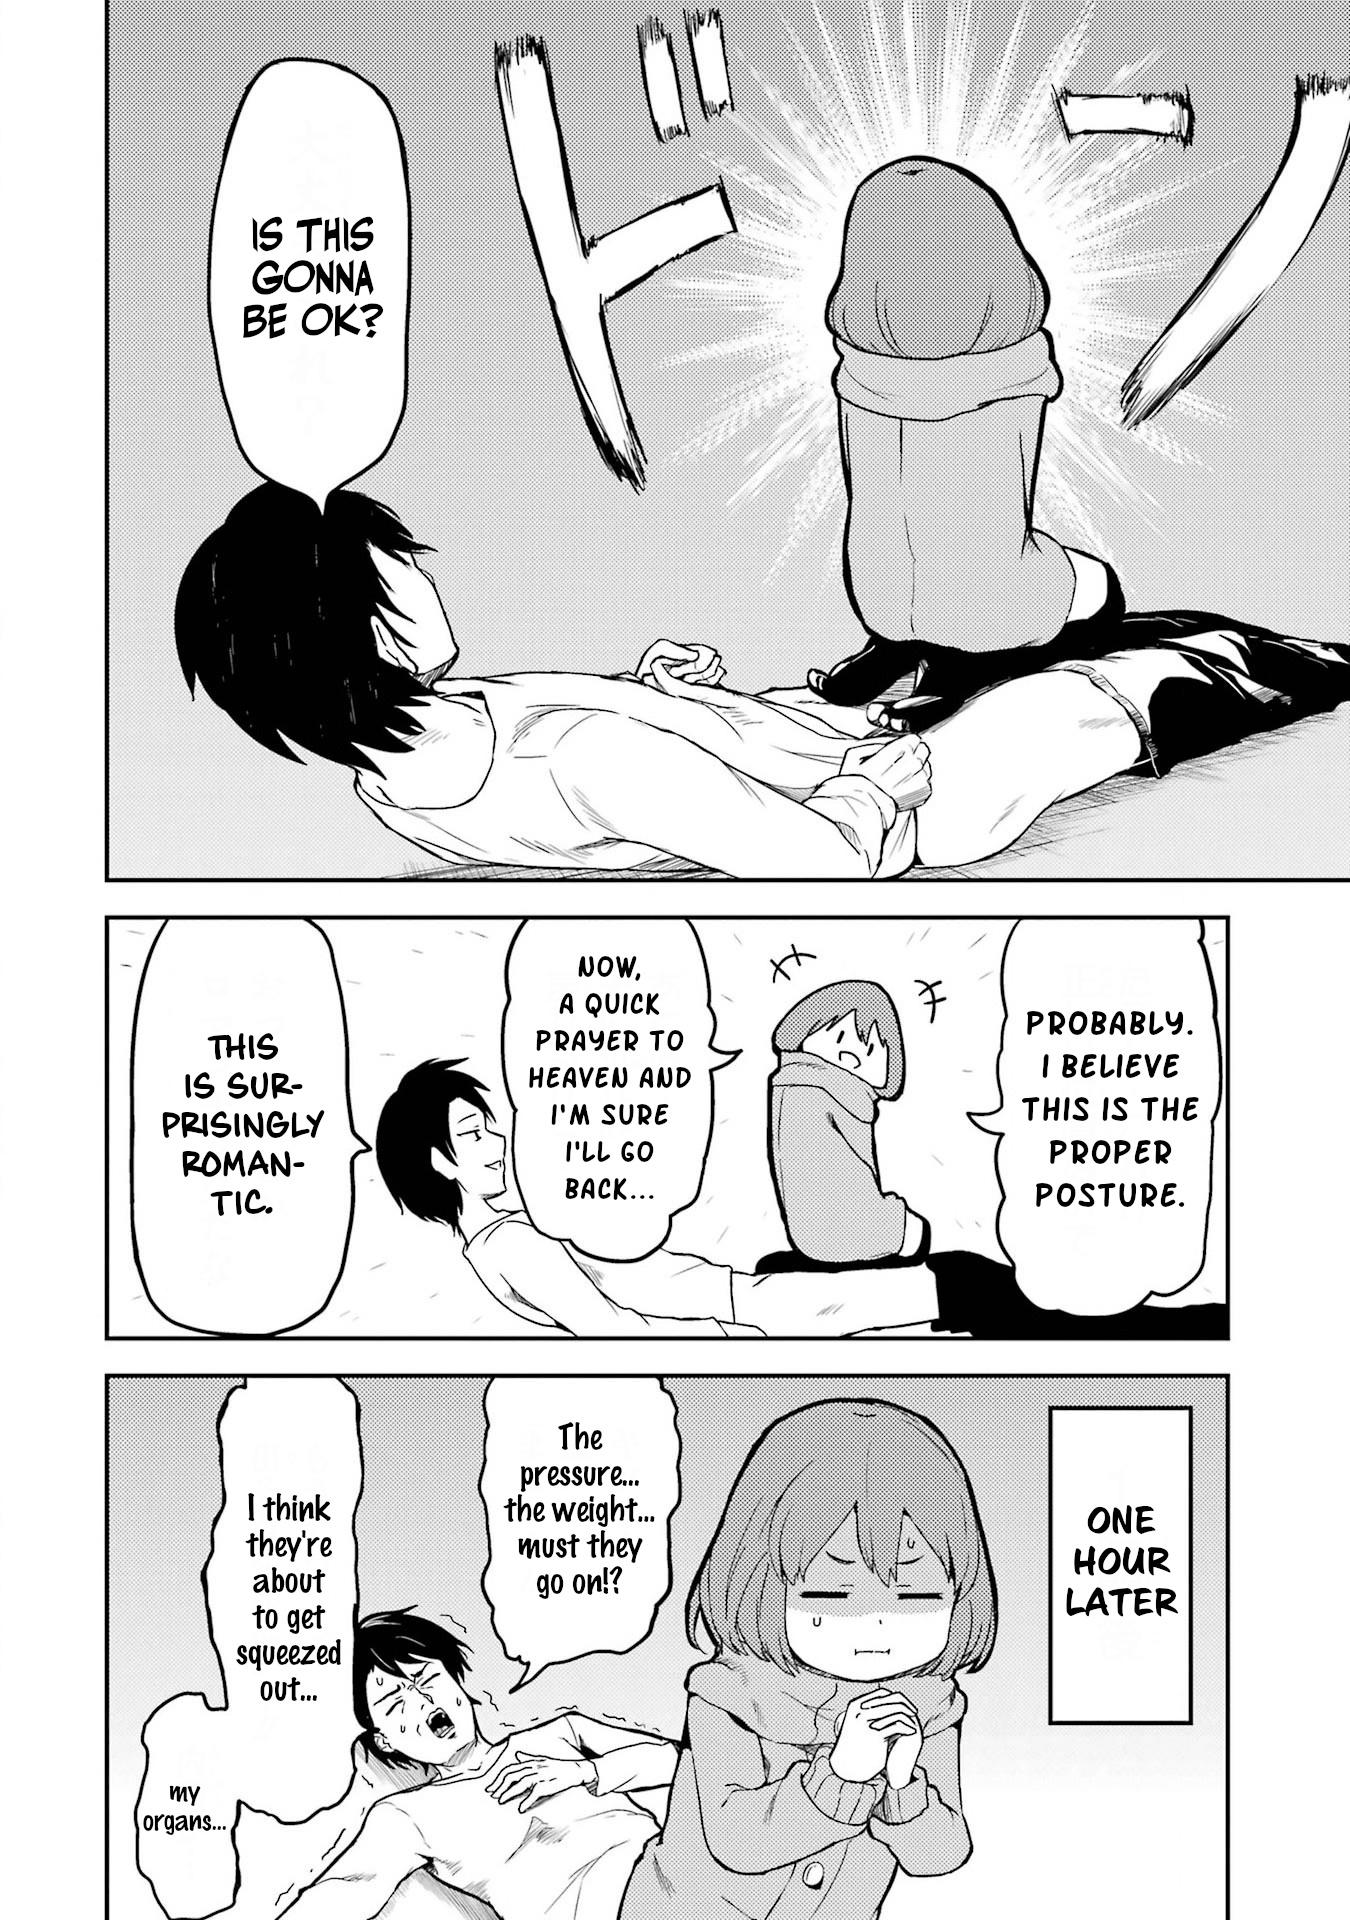 Turns out my dick was a cute girl manga